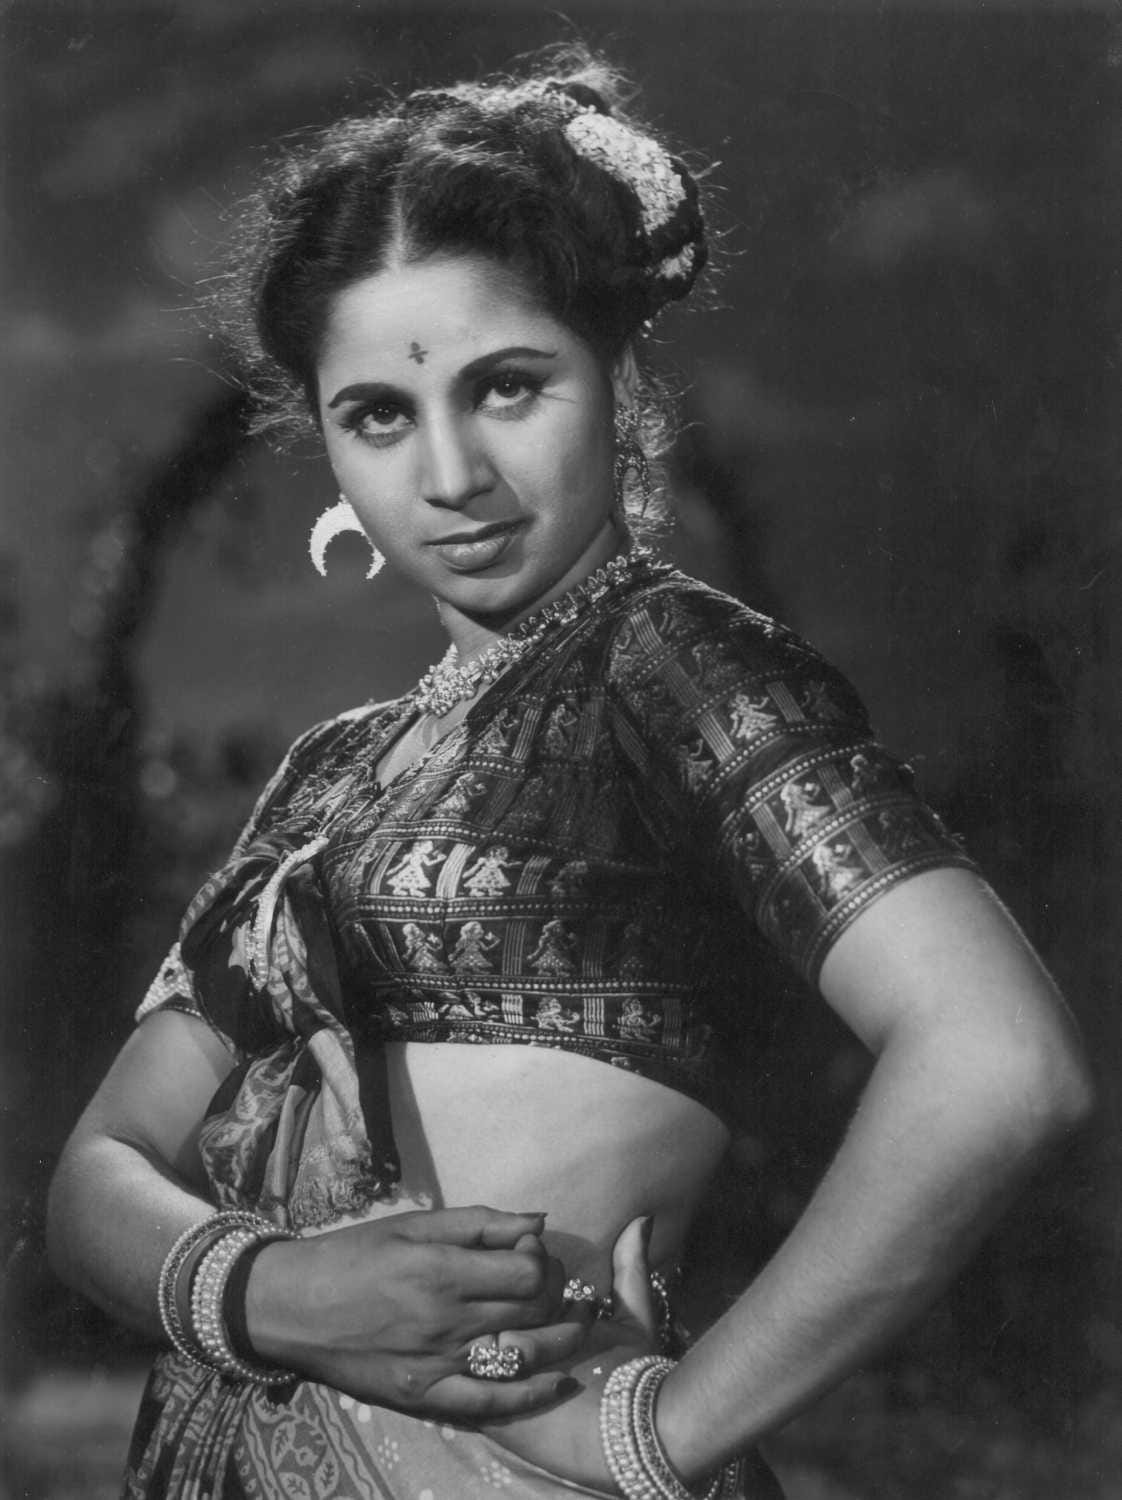 Remembering the vivacious and beautiful Geeta Bali, who passed away on this  day (21 January). | by BollywooDirect | Medium